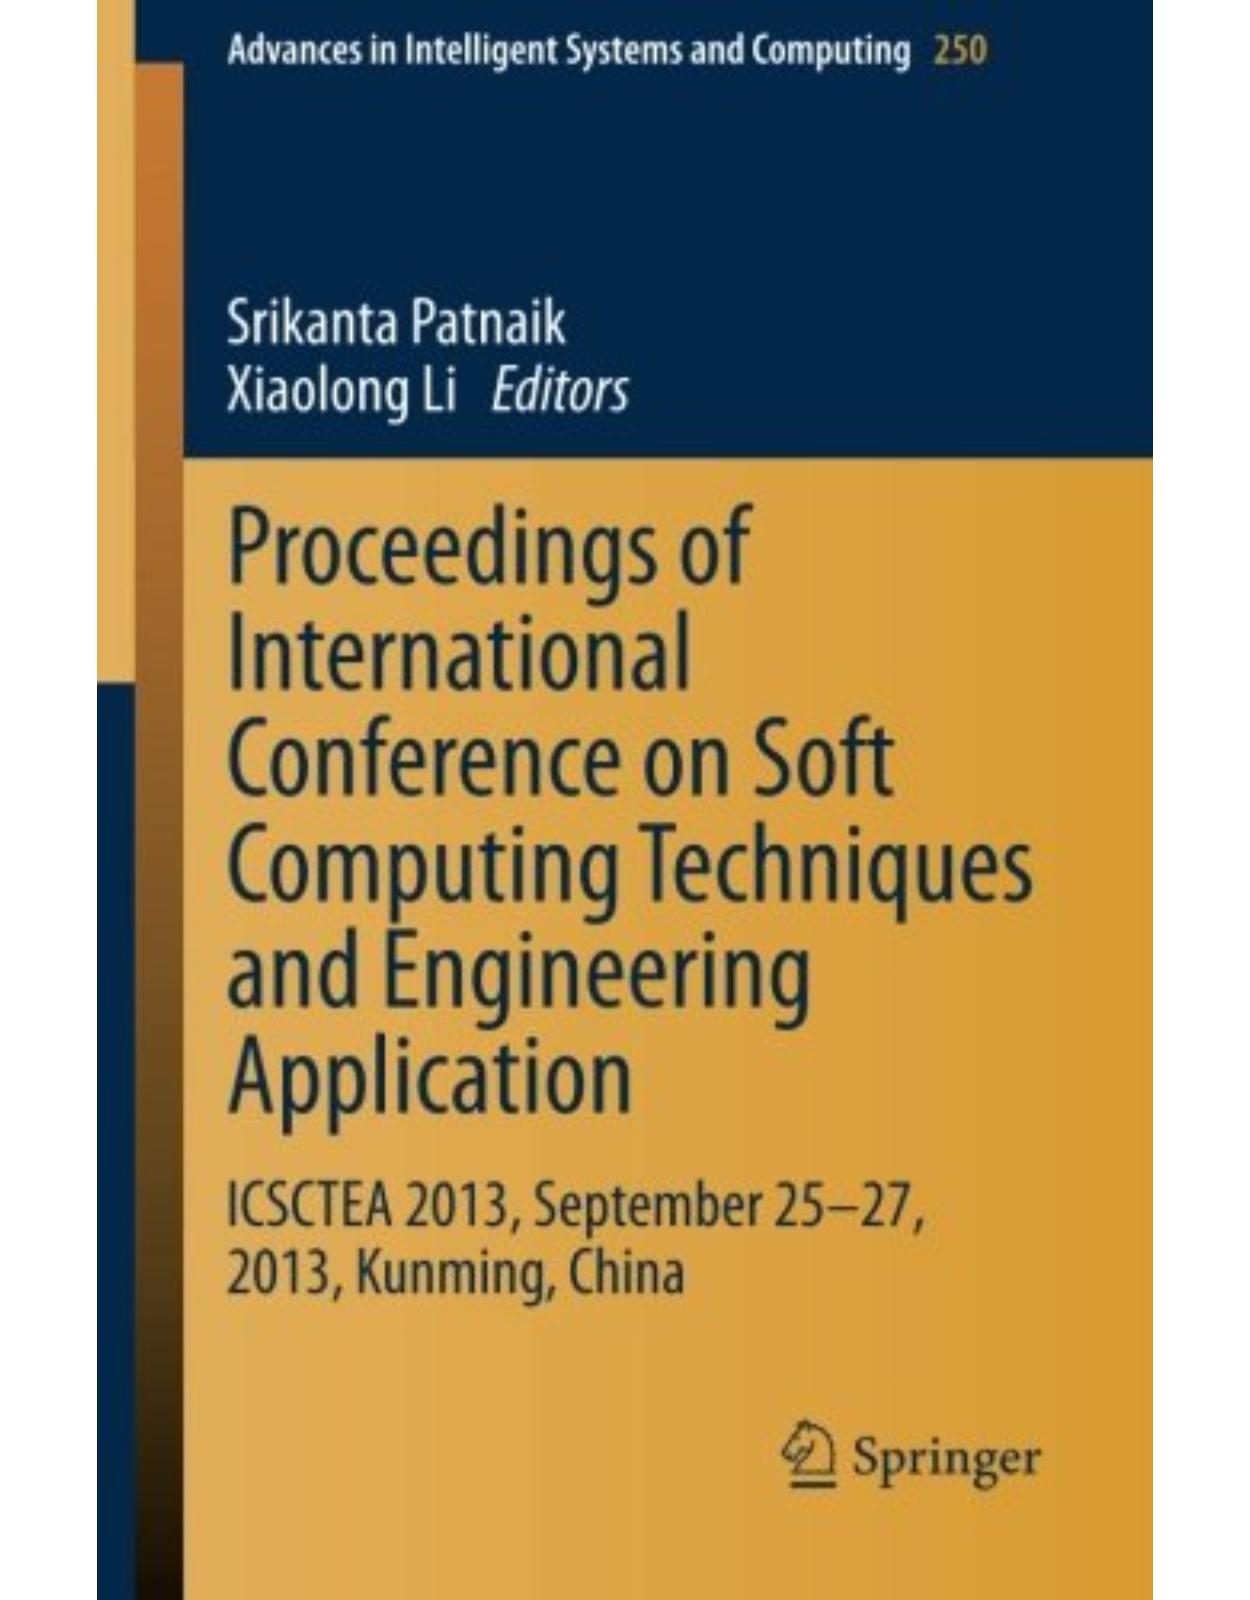 Proceedings of International Conference on Soft Computing Techniques and Engineering Application